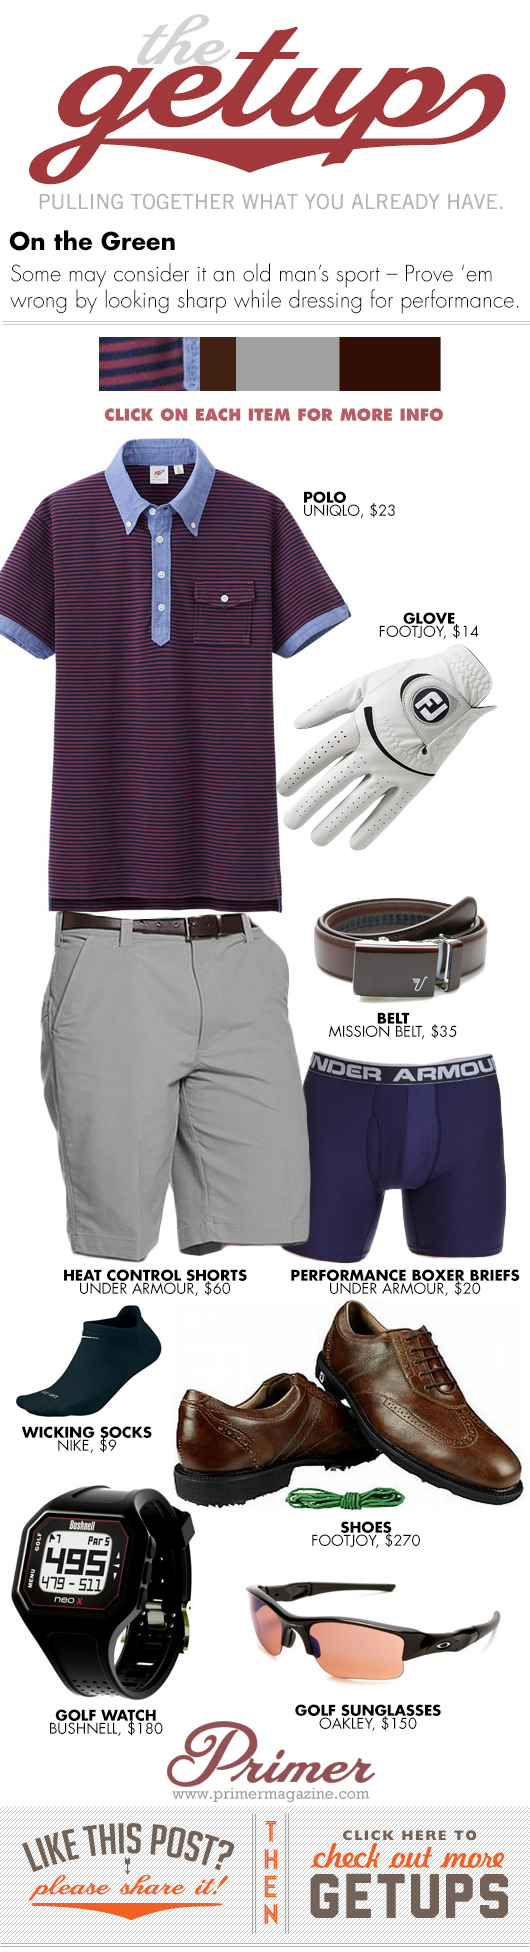 Getup On the Green - polo golf glove, gray pants, golf shoes